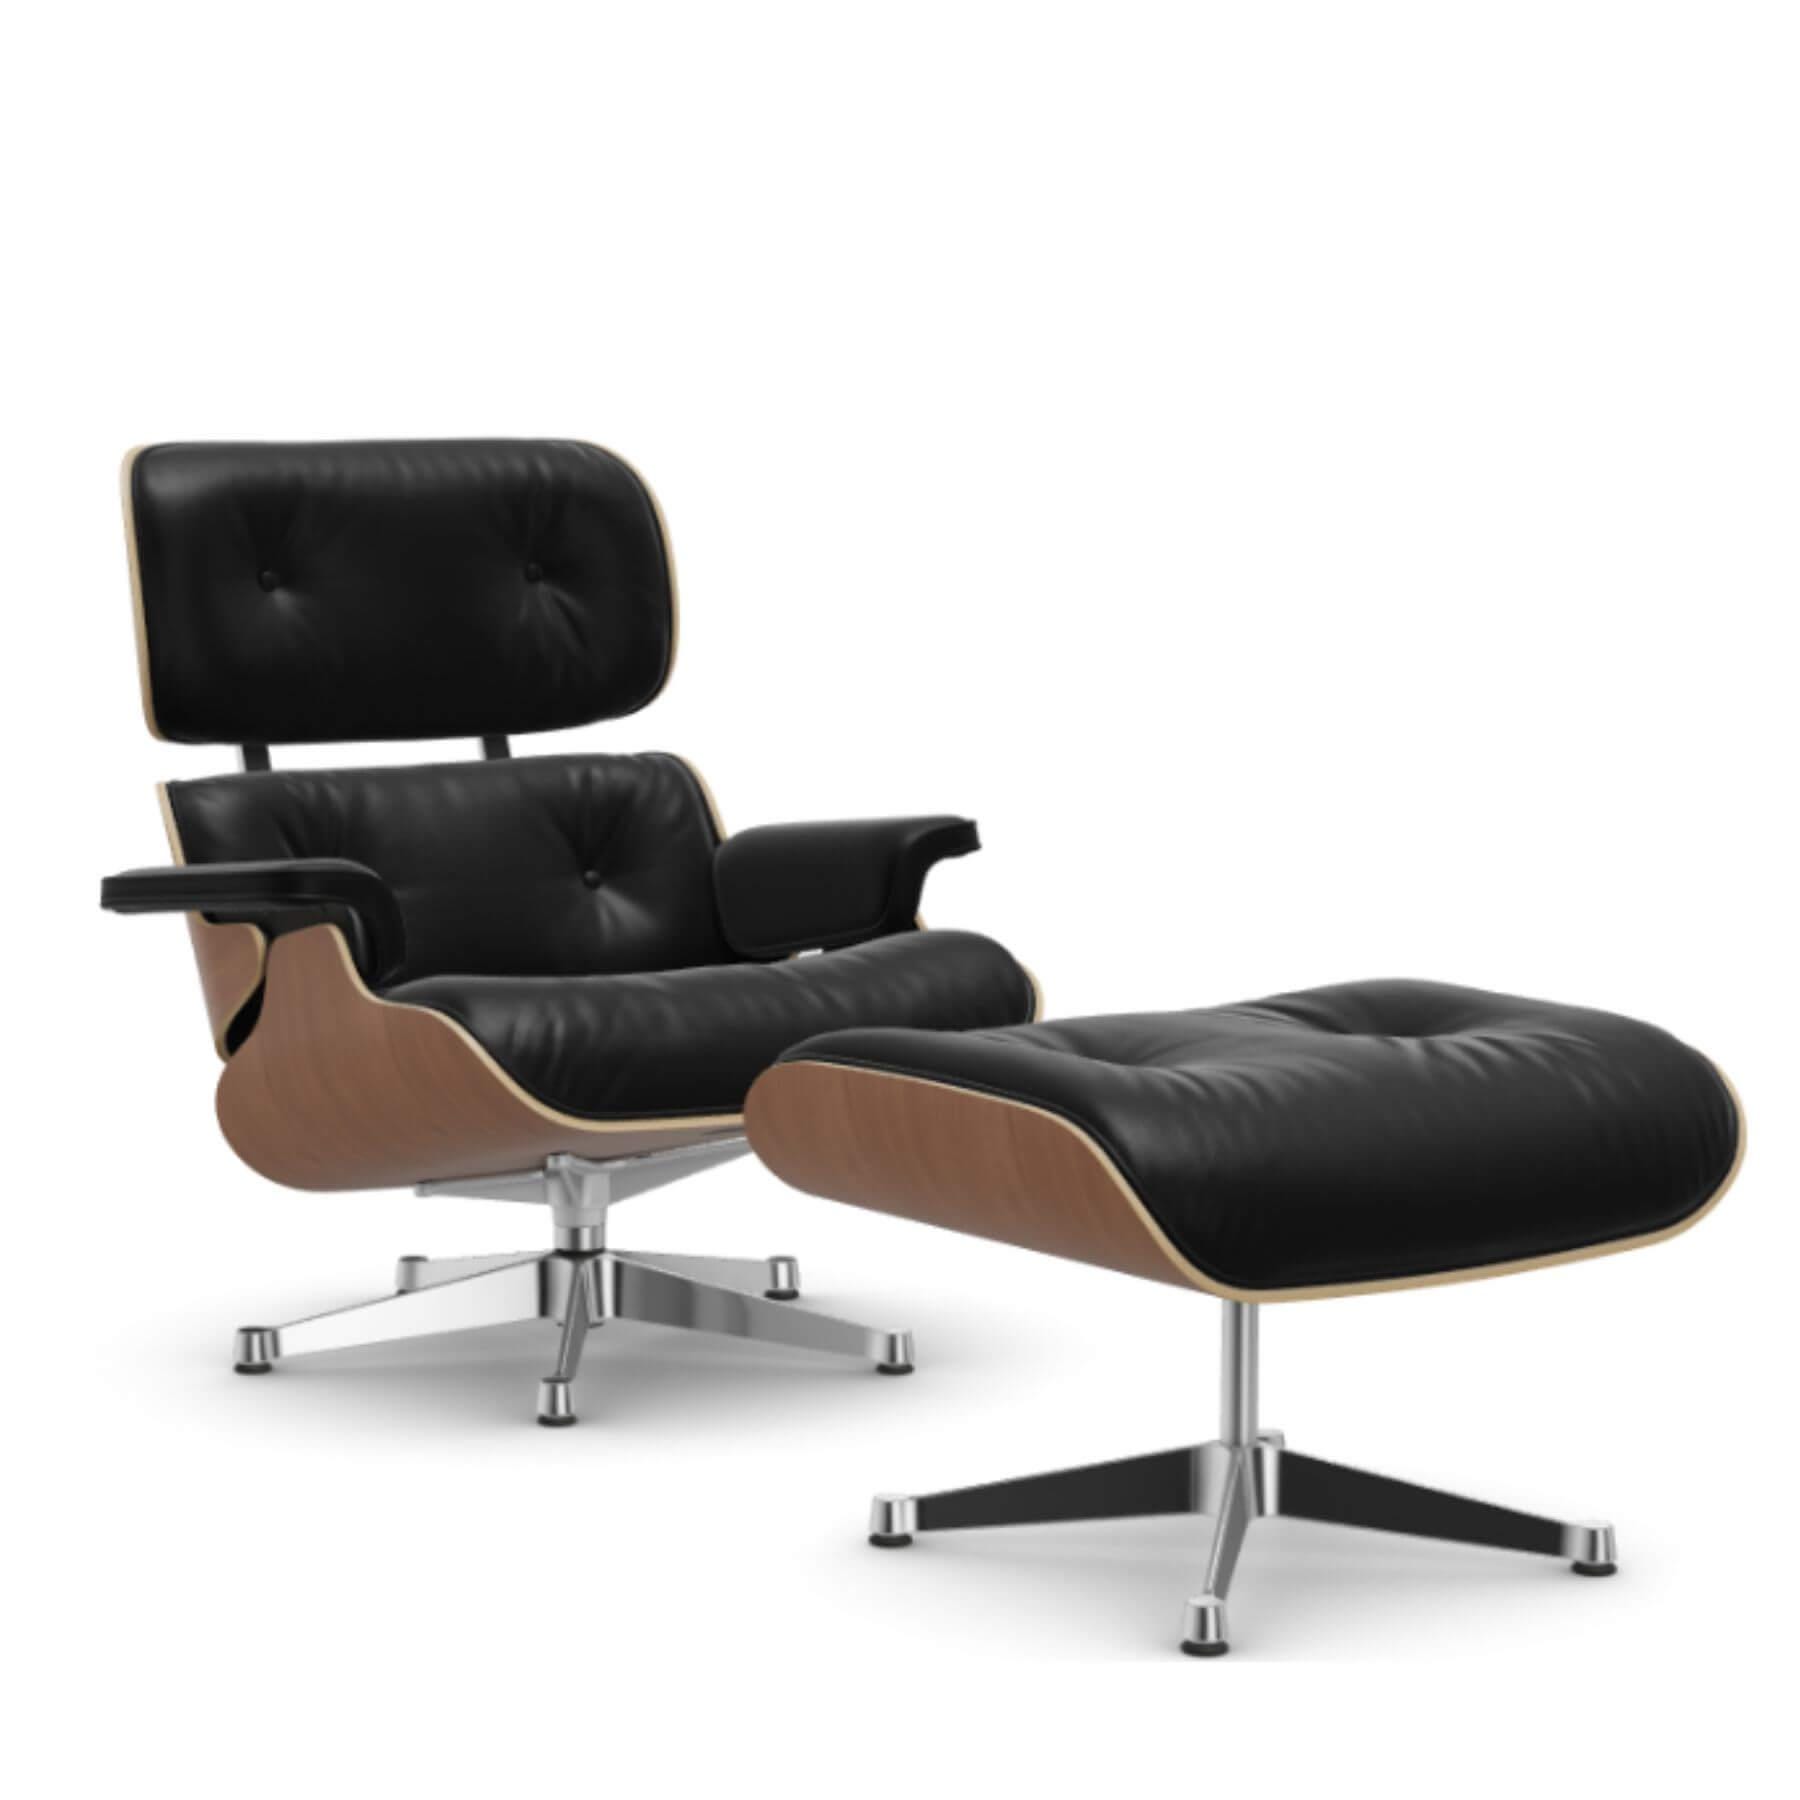 Vitra Eames Classic Lounge Chair American Cherry Leather Natural F Nero Polished Aluminium With Ottoman Light Wood Designer Furniture From Hollowa